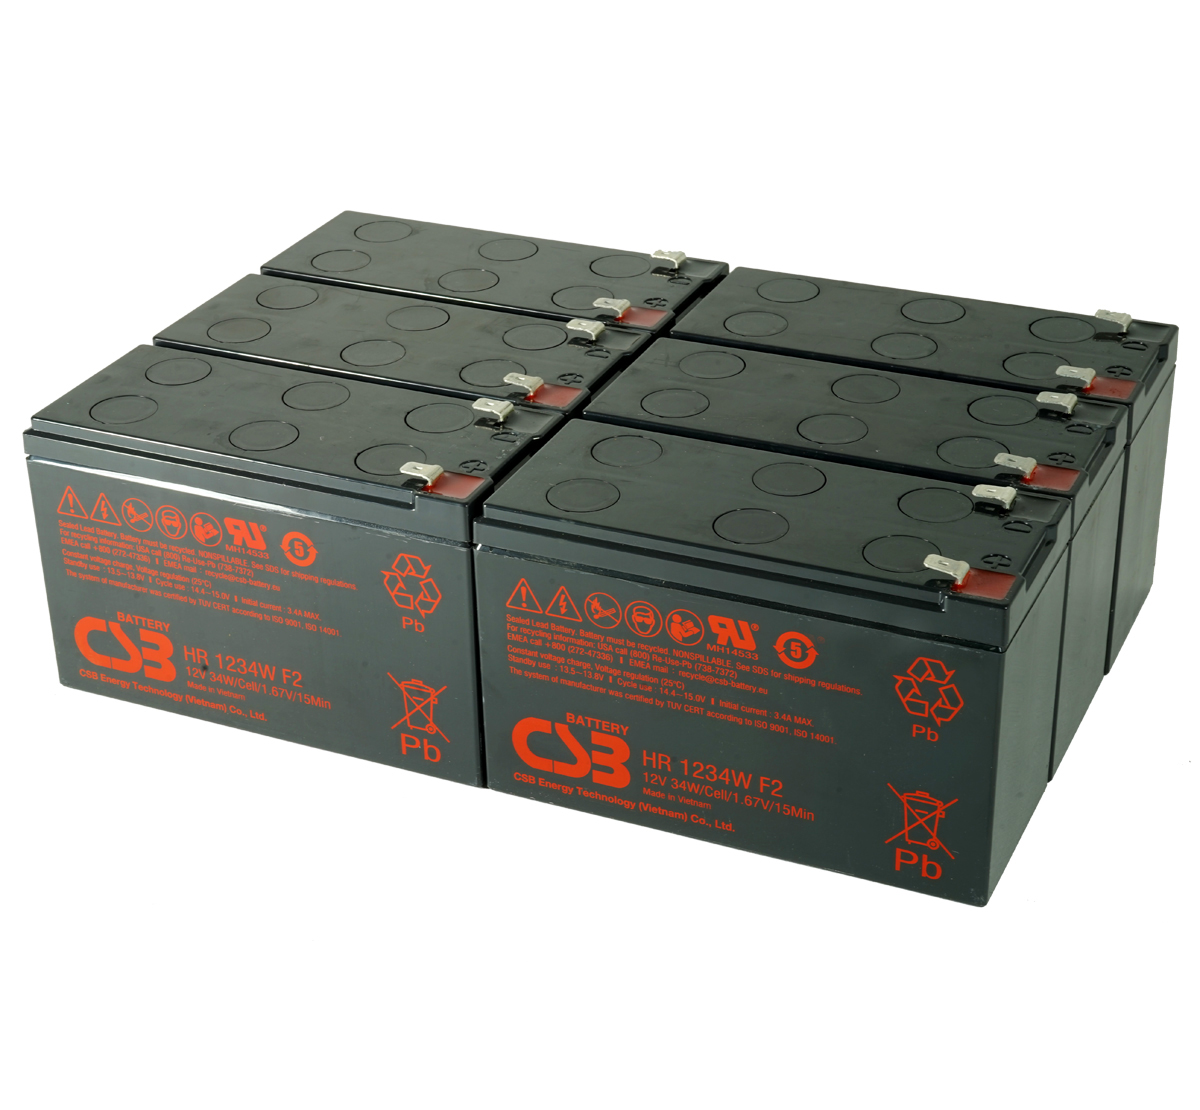 MDS1017 UPS Battery Kit for MGE AB1017